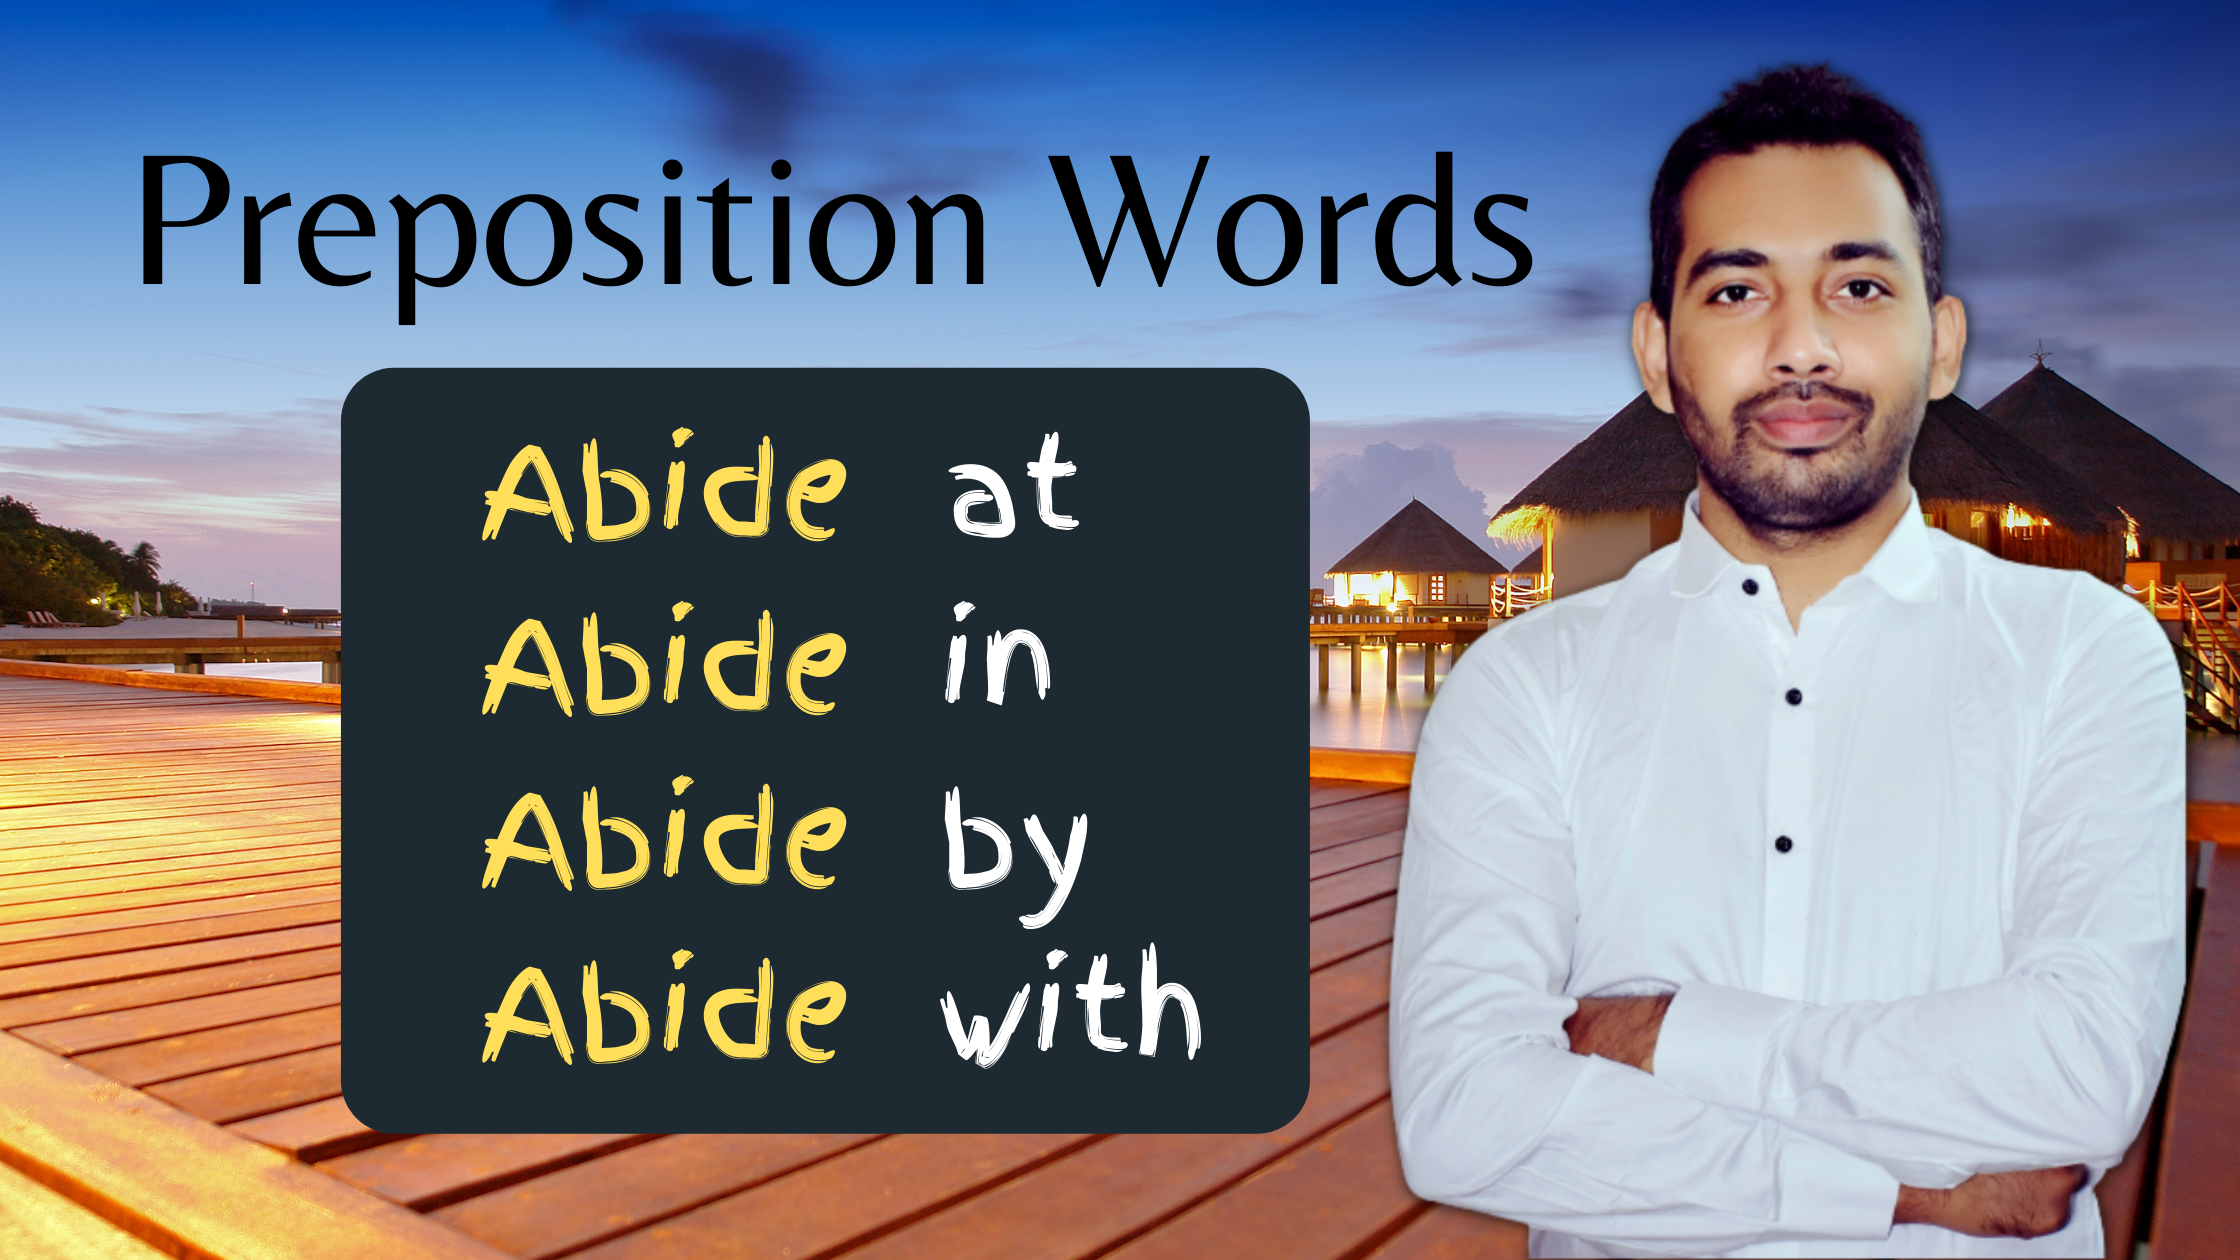 Preposition Words with Abide